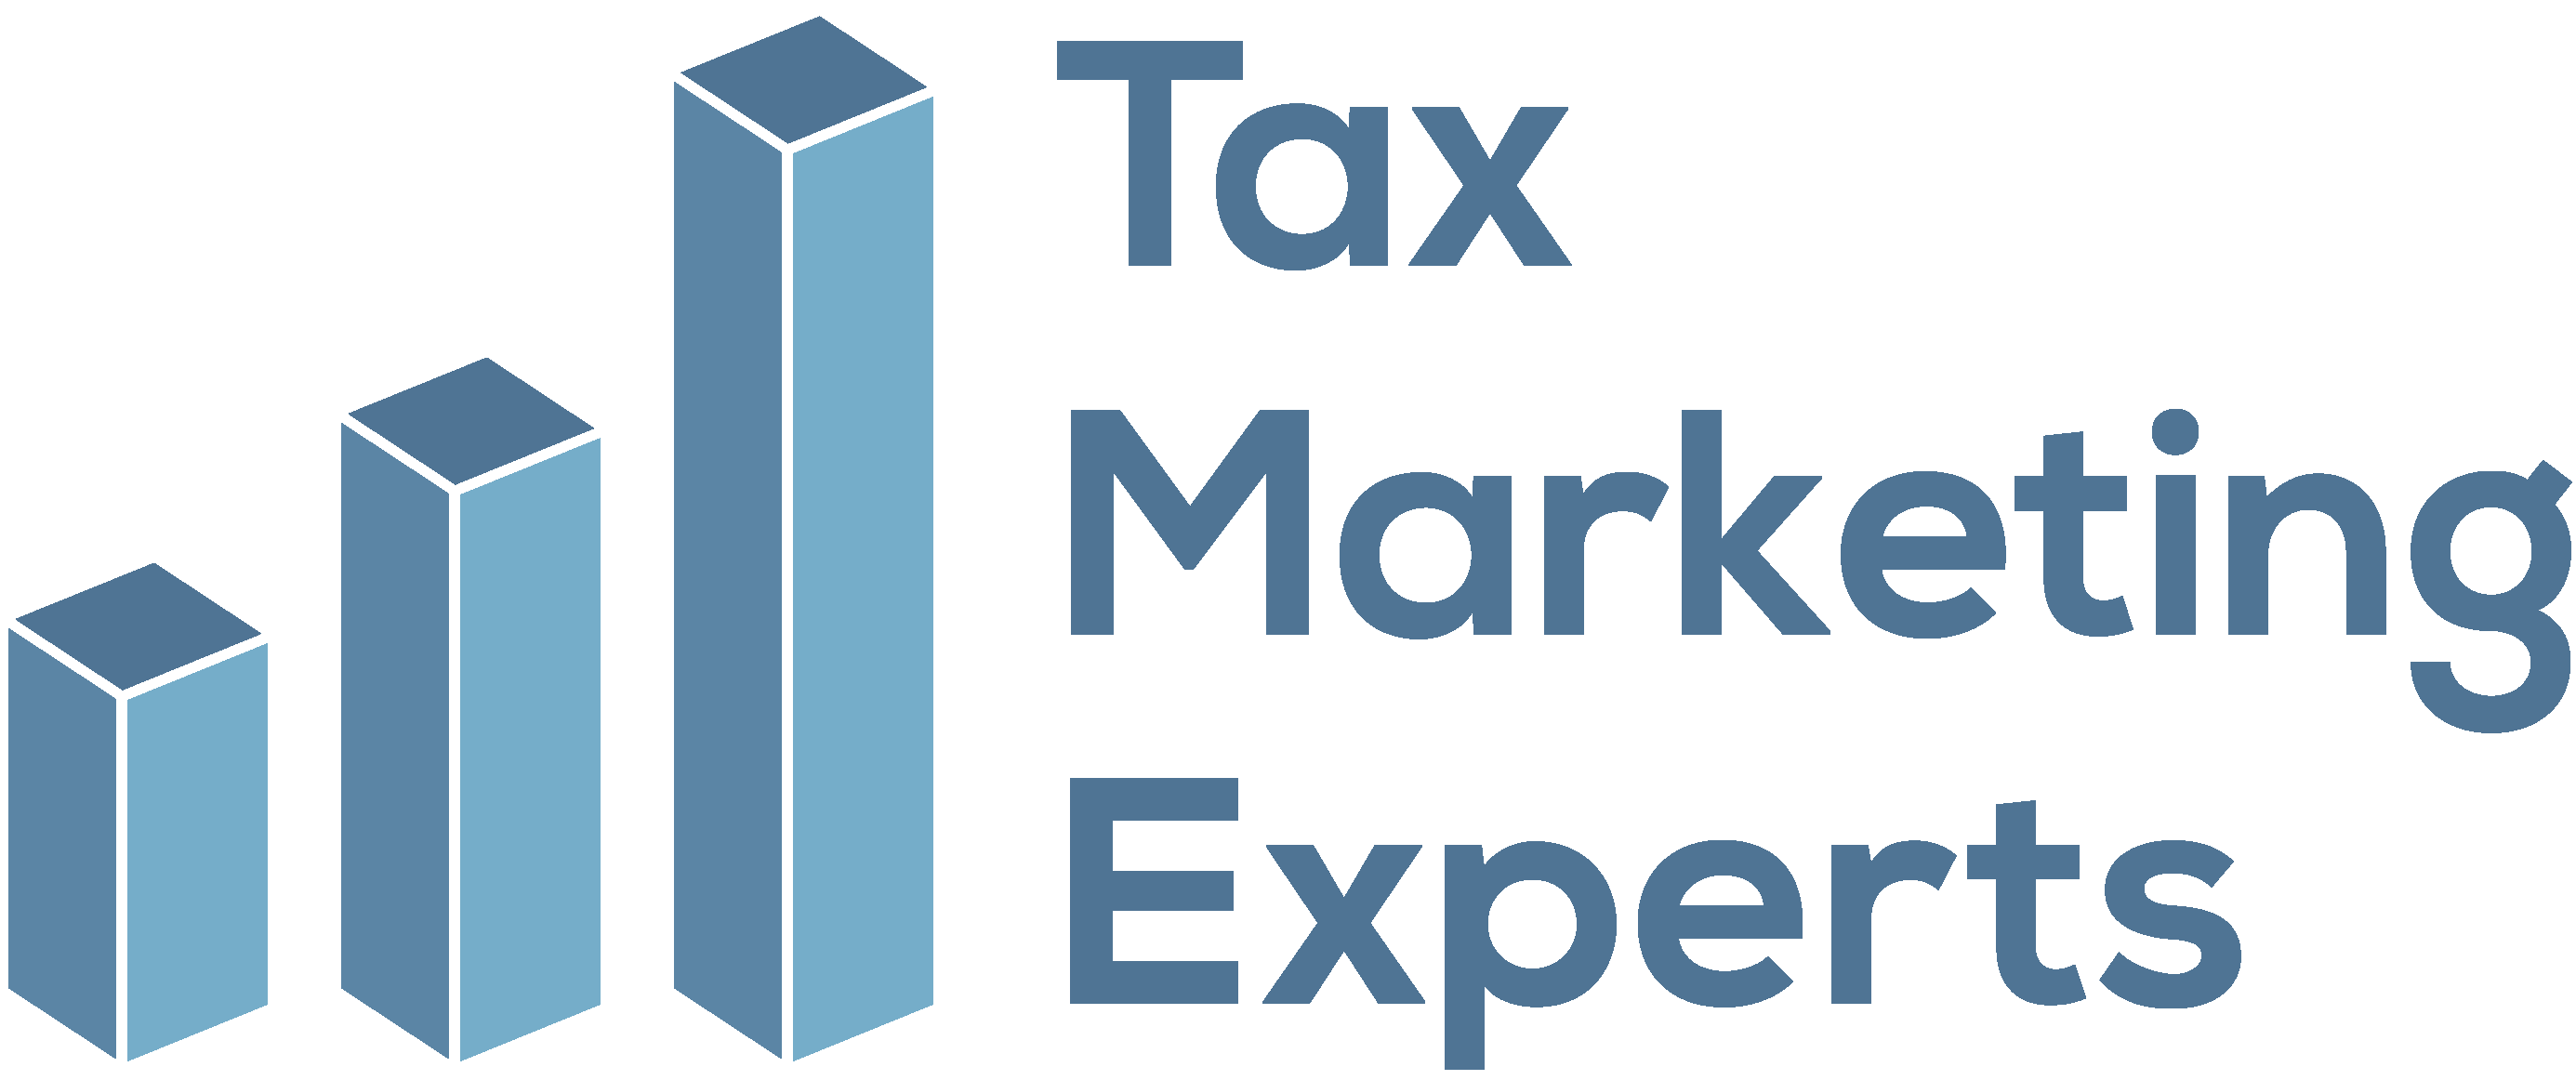 Tax Marketing Experts - Digital Marketing for Accounting & Bookkeeping Firms